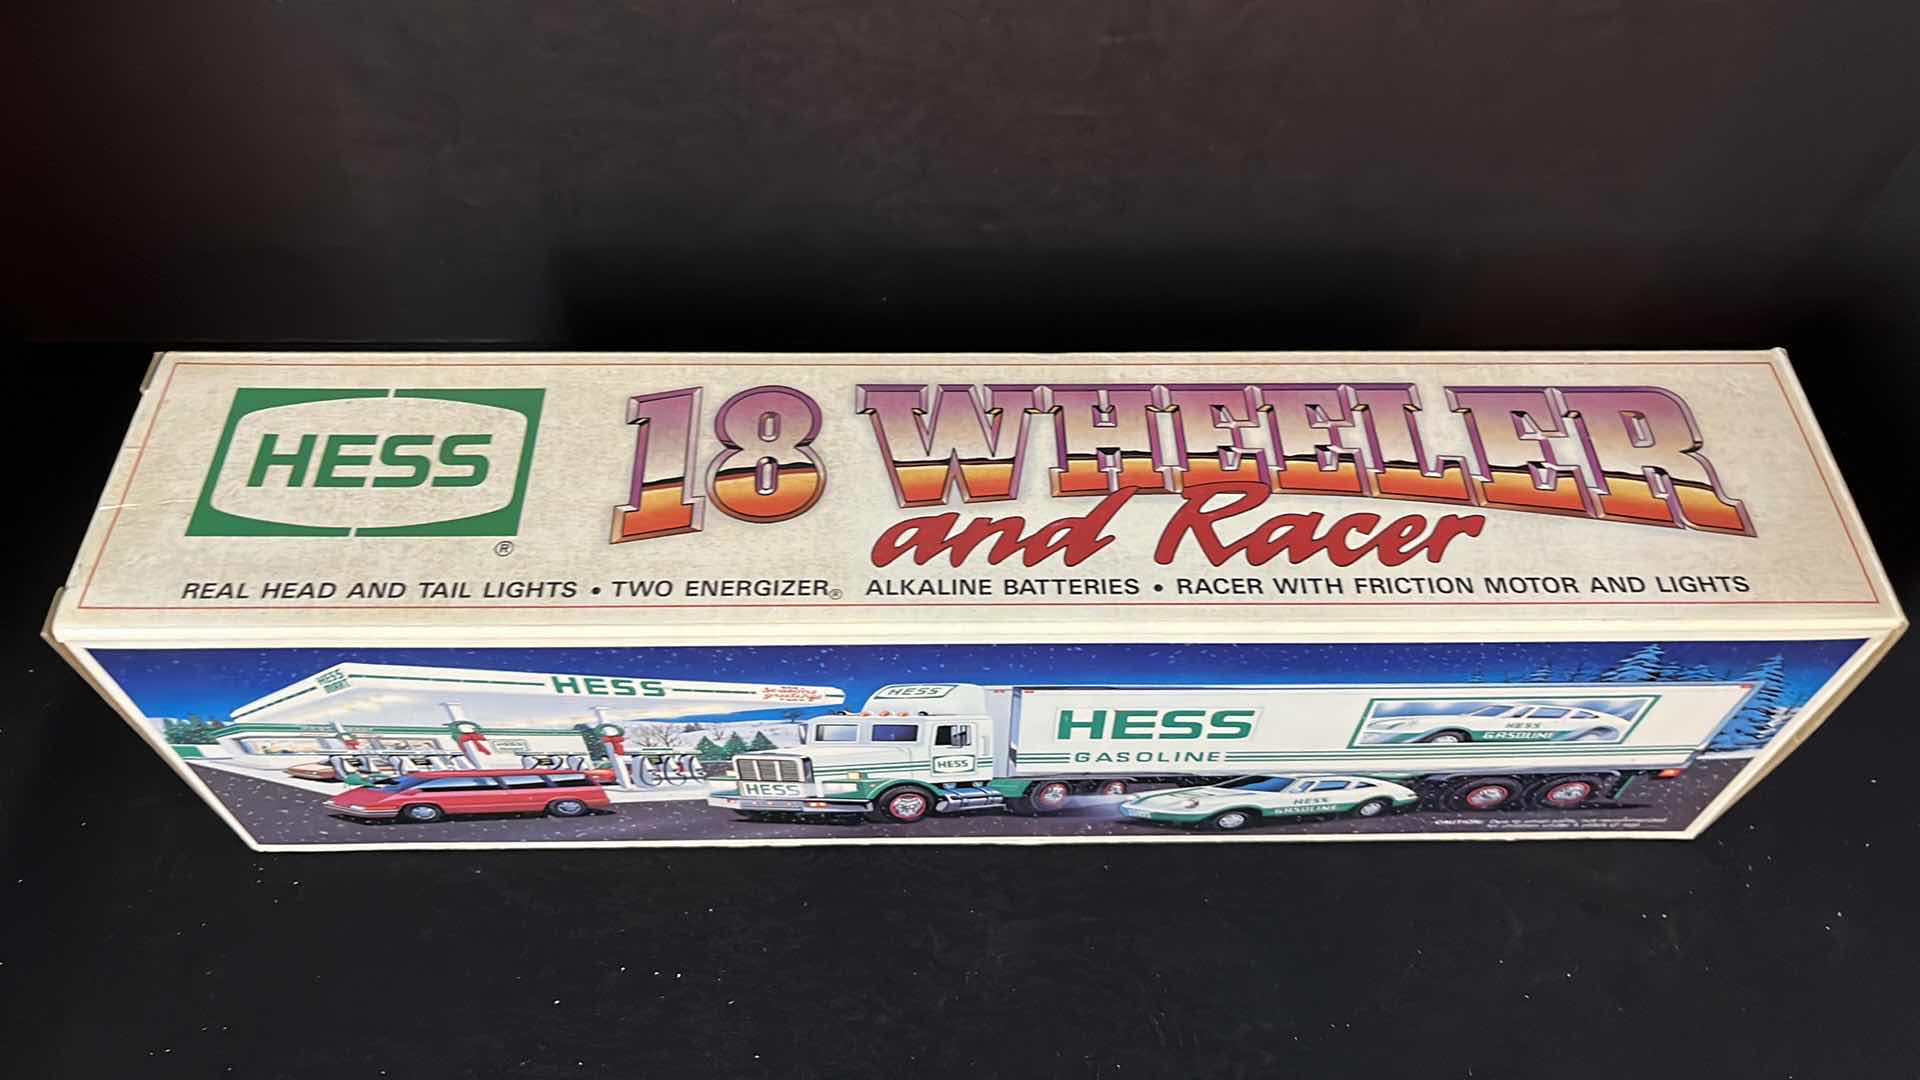 Photo 2 of VINTAGE HESS 18 WHEELER AND RACER 1992